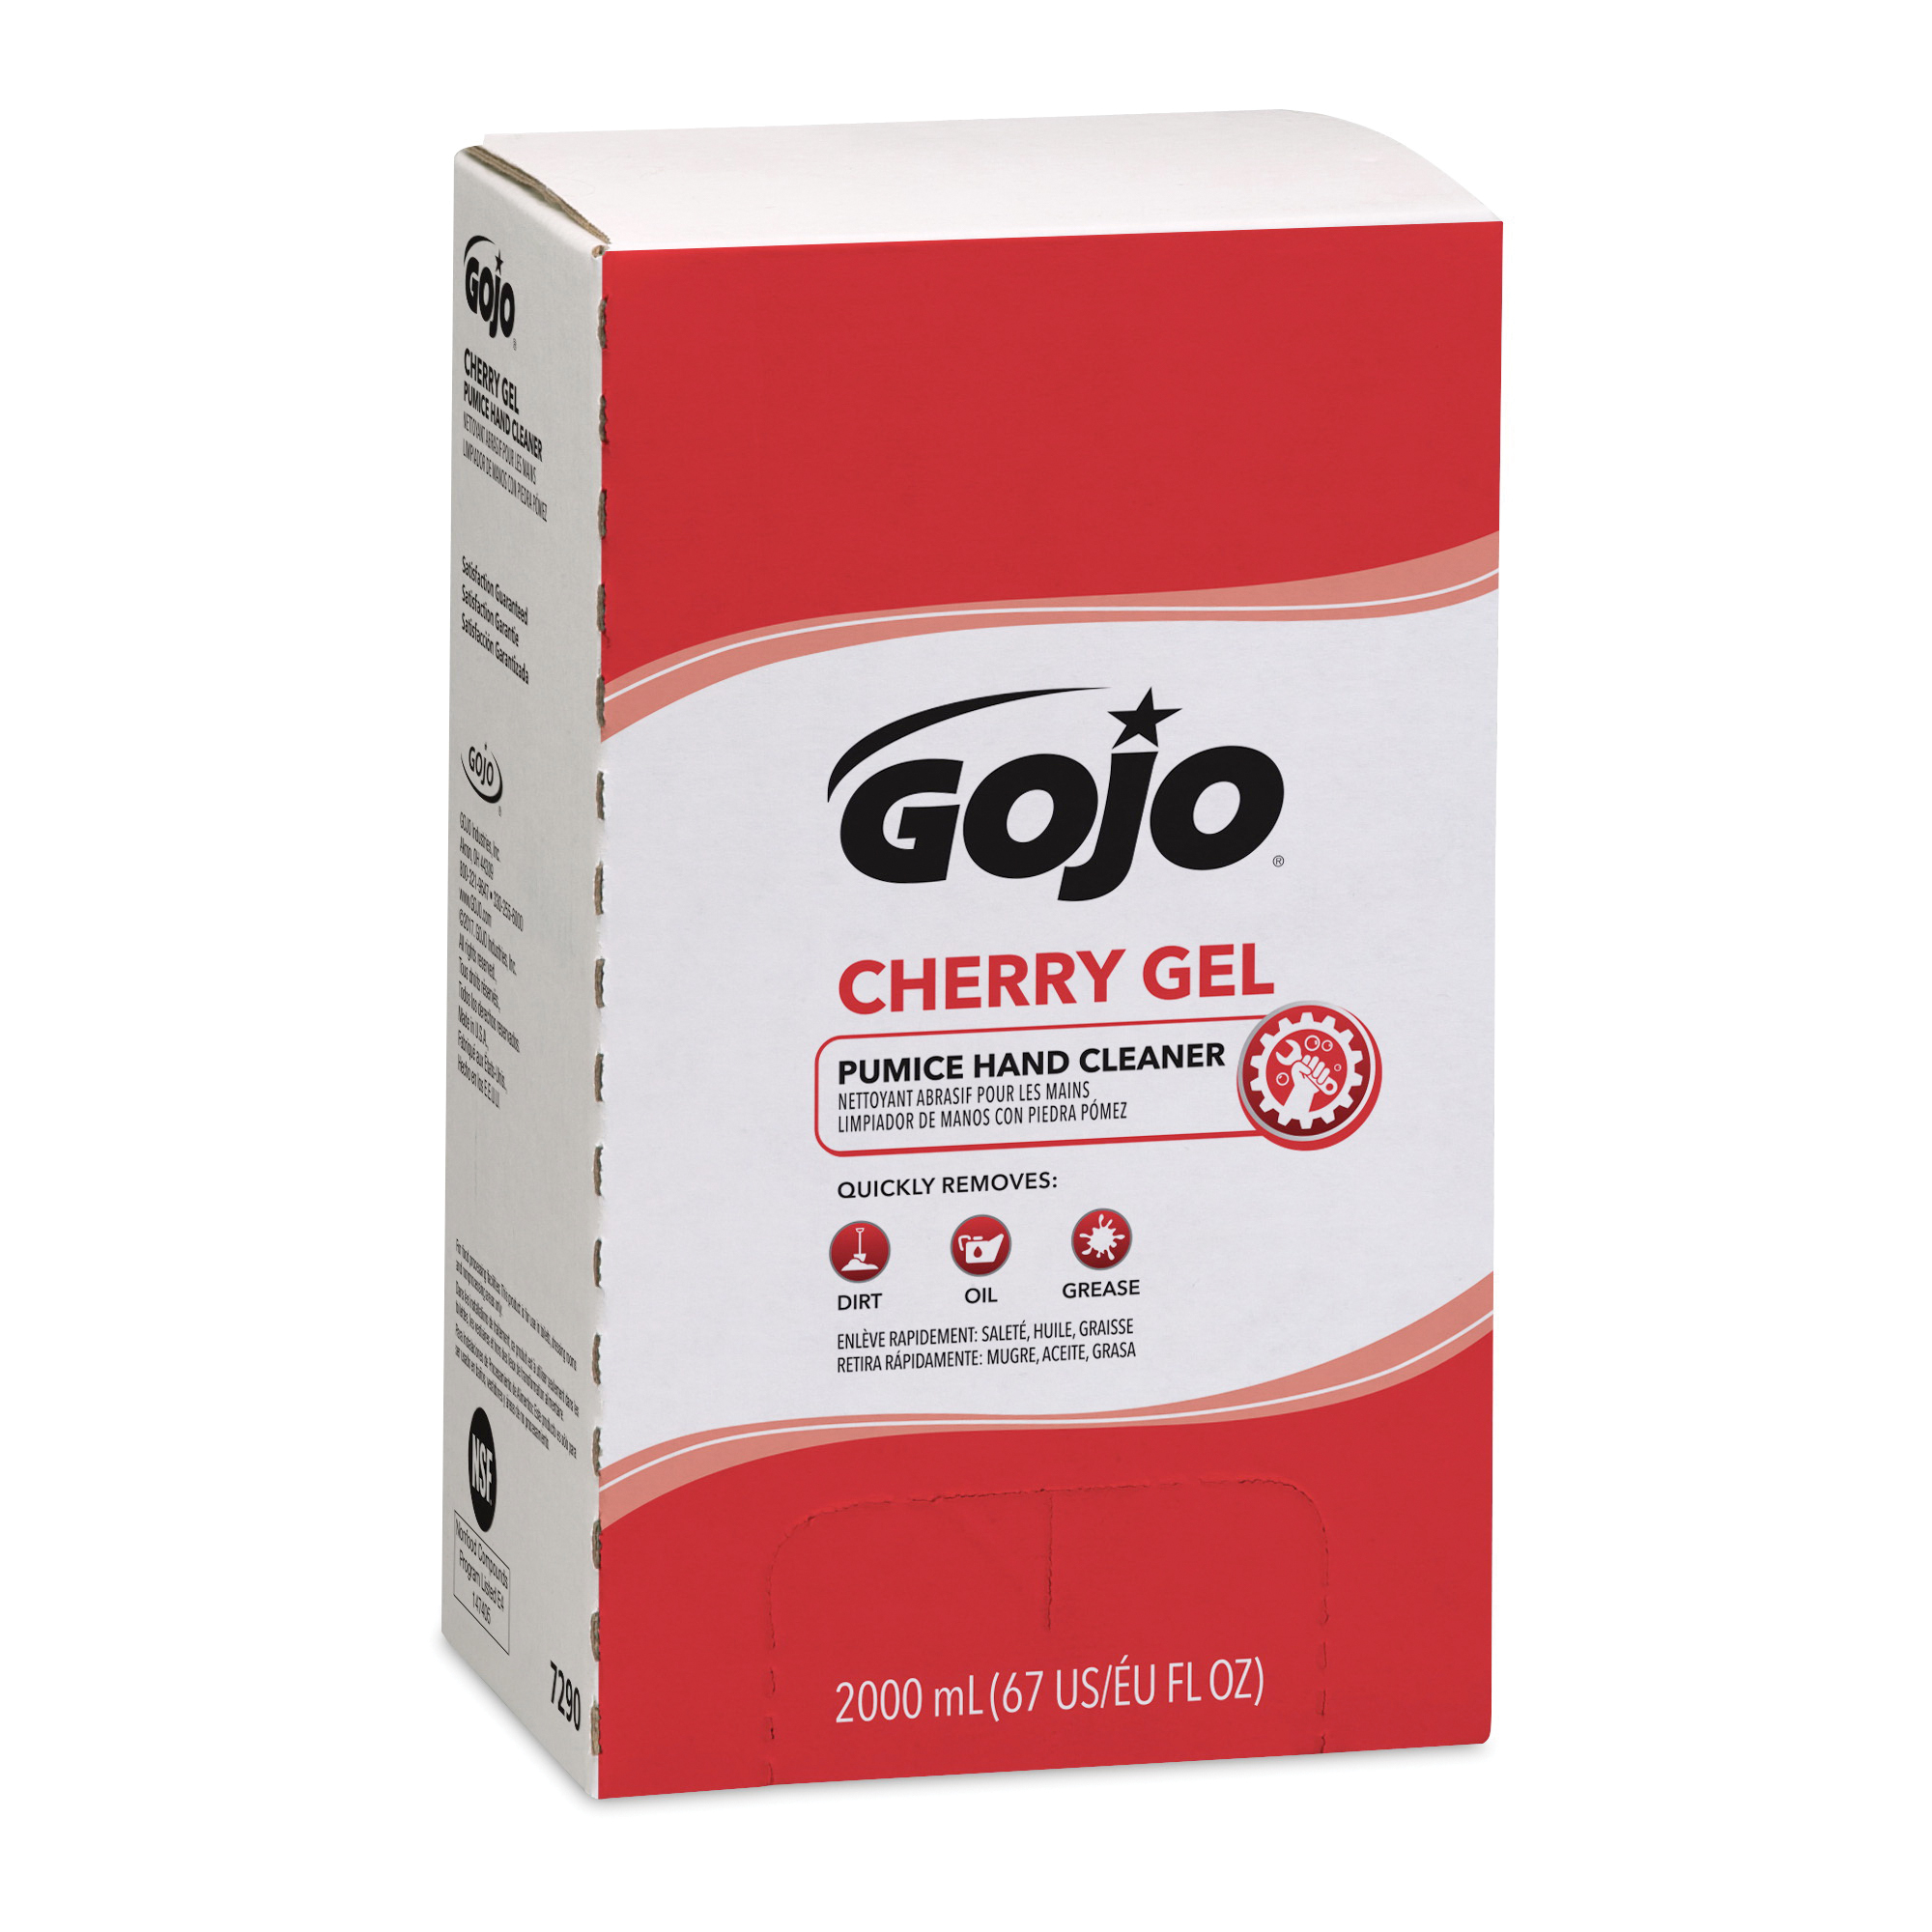 GOJO® 7290-04 PRO™ TDX™ Heavy Duty Pumice Hand Cleaner, 2000 mL Nominal, Bag-in-Box Package, Gel Form, Cherry Odor/Scent, Red/Translucent